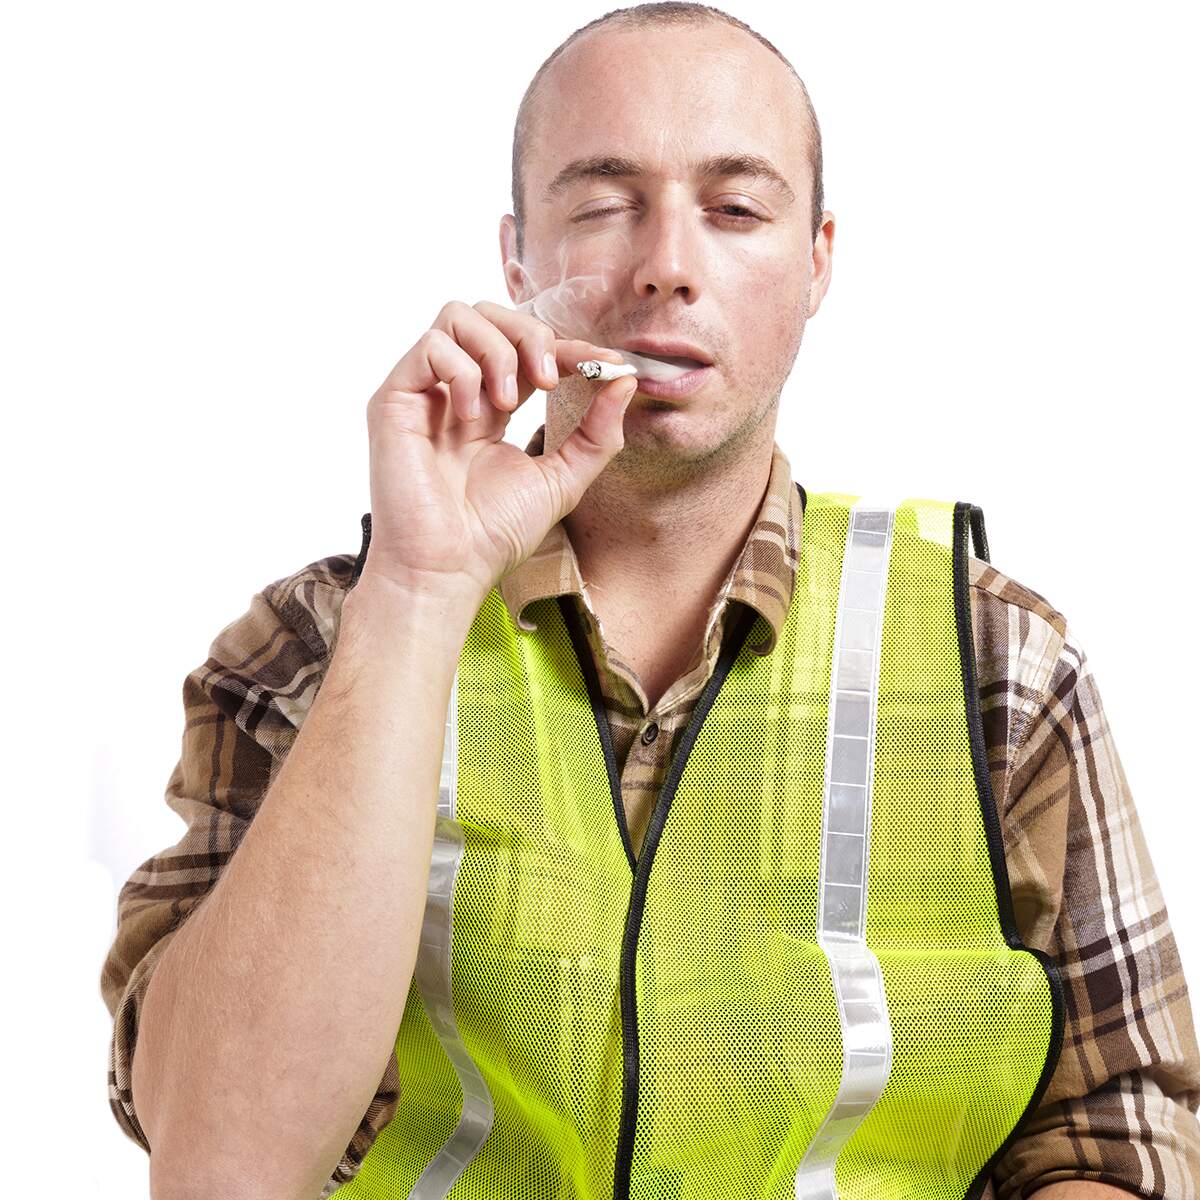 man in high-visibility vest smoking a cigarette while being visibly impaired